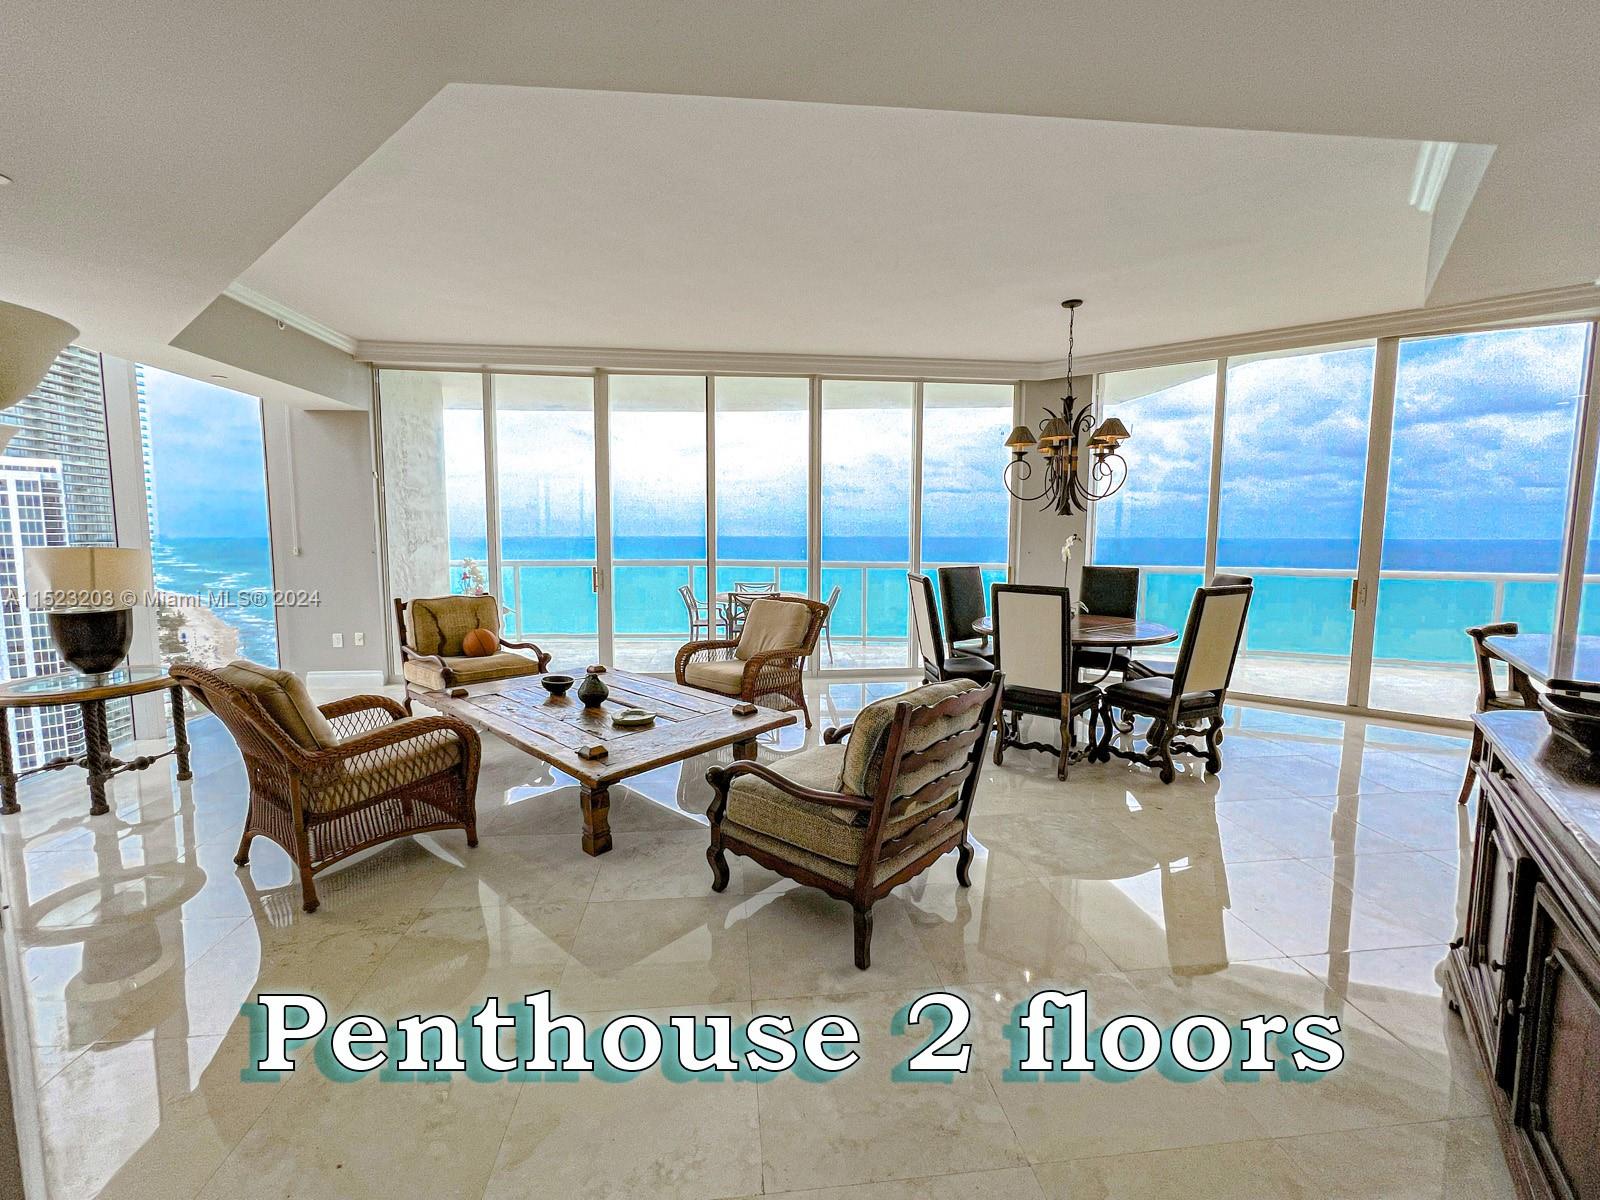 Price just DROPPED, this is the right time to rent it! Luxury awaits in this 4-bed, 4 1/2 -bath PENTHOUSE with a sprawling outdoor oasis. Enjoy panoramic ocean views from every room, while the expansive terrace beckons for serene moments. Elevate your lifestyle in this haven of elegance. Parking spaces? You have three just for you!  Act fast to secure this Ocean front gem. Super easy to show!